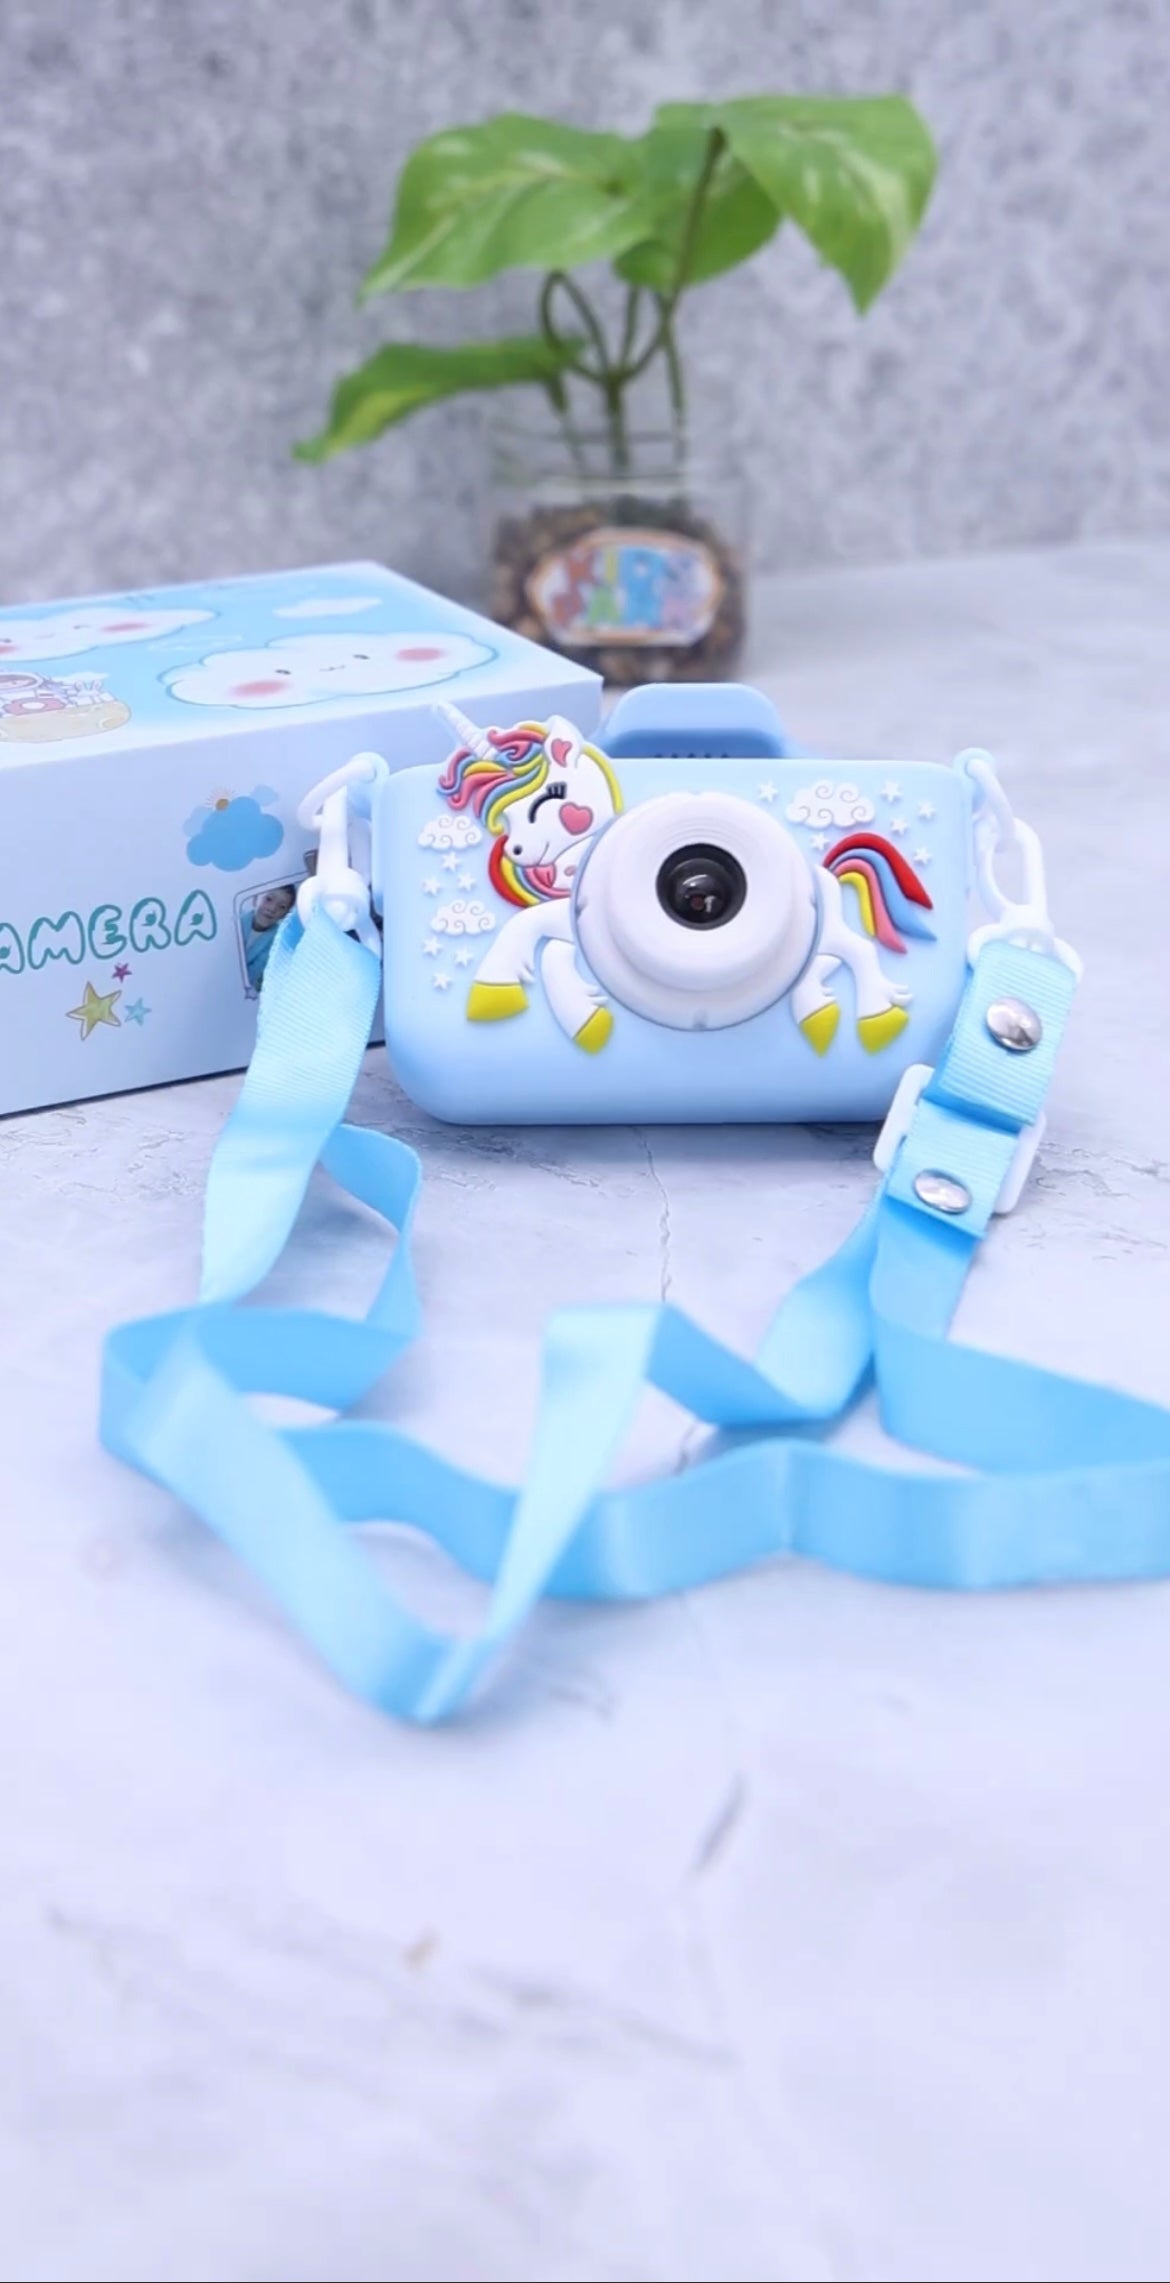 Space fun camera for kids  -1080p | Auto Focus and games